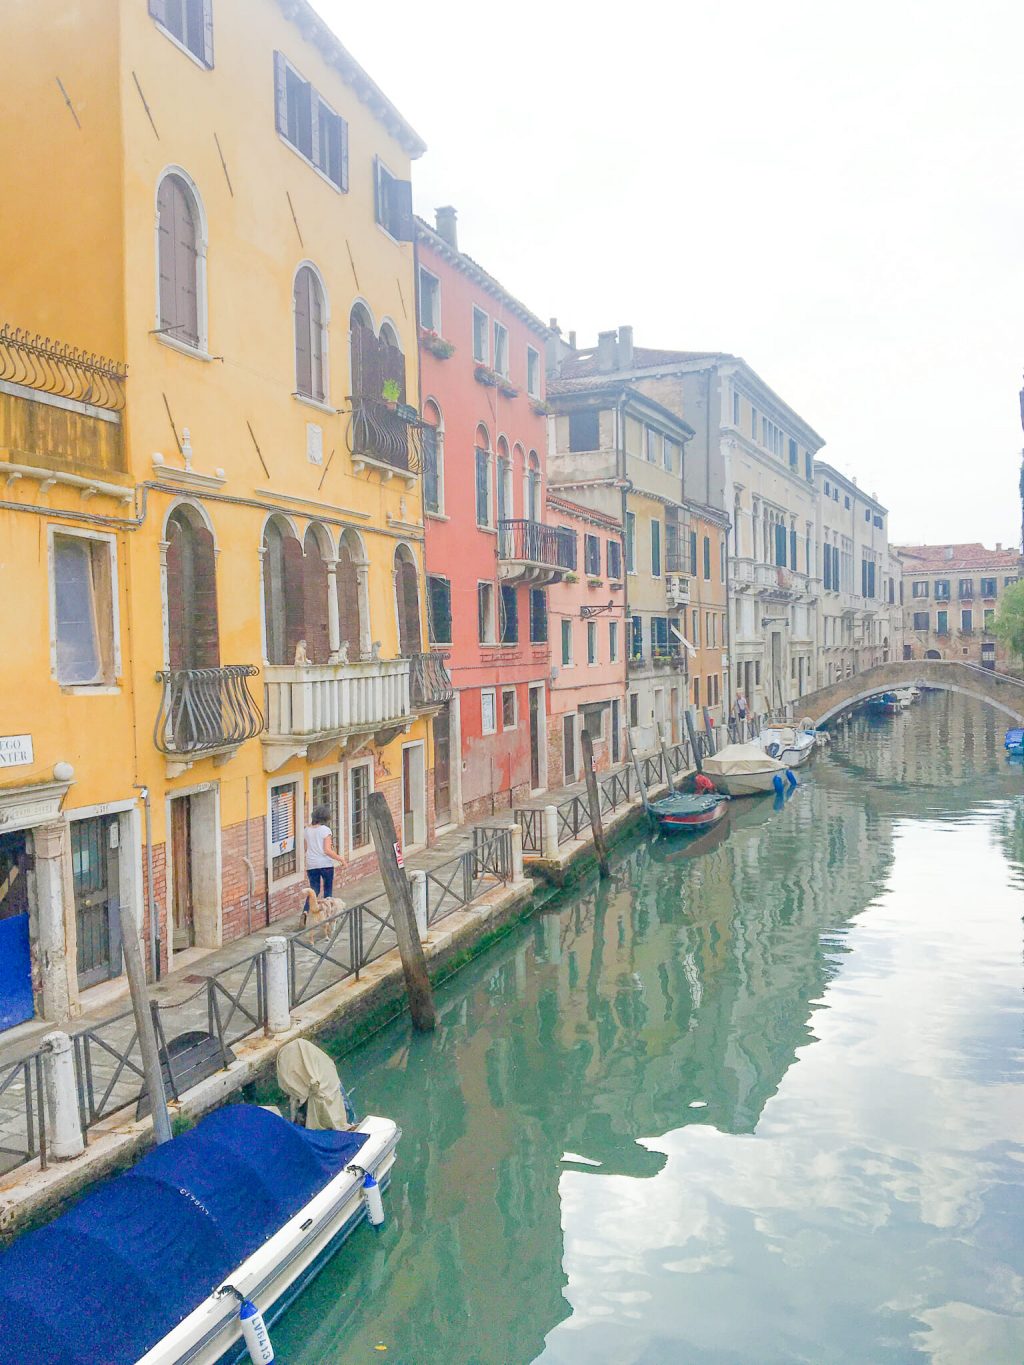 View of the Venetian river streets